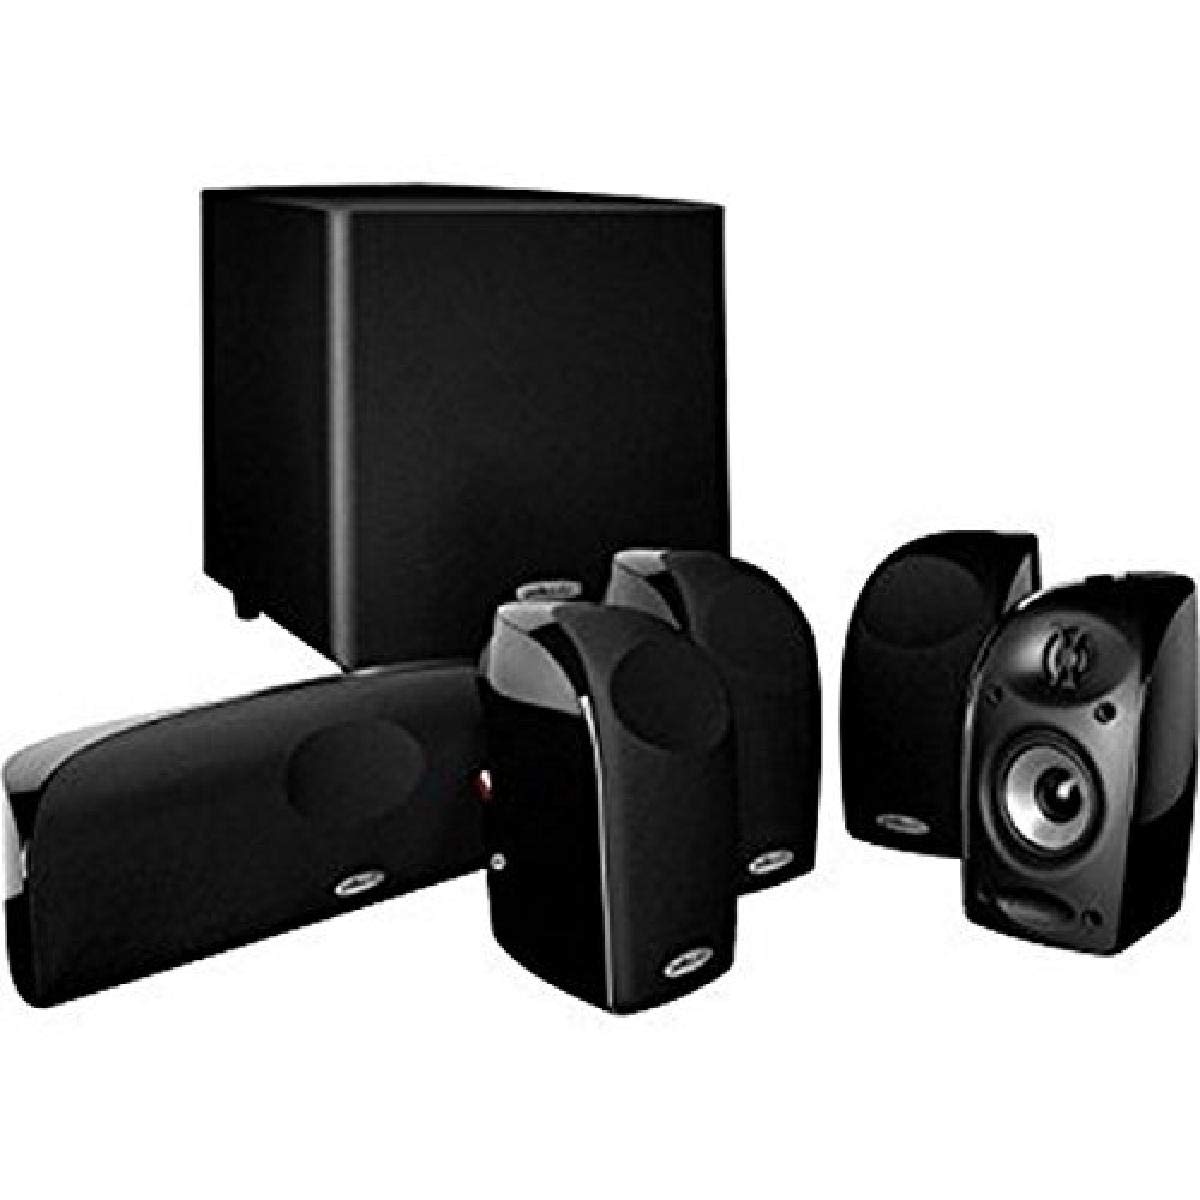 Polk Audio Blackstone TL1600 Compact Home Theater System, Total 6 Items - 4 TL1 Satellite Speakers, 1 Center Channel & an 8